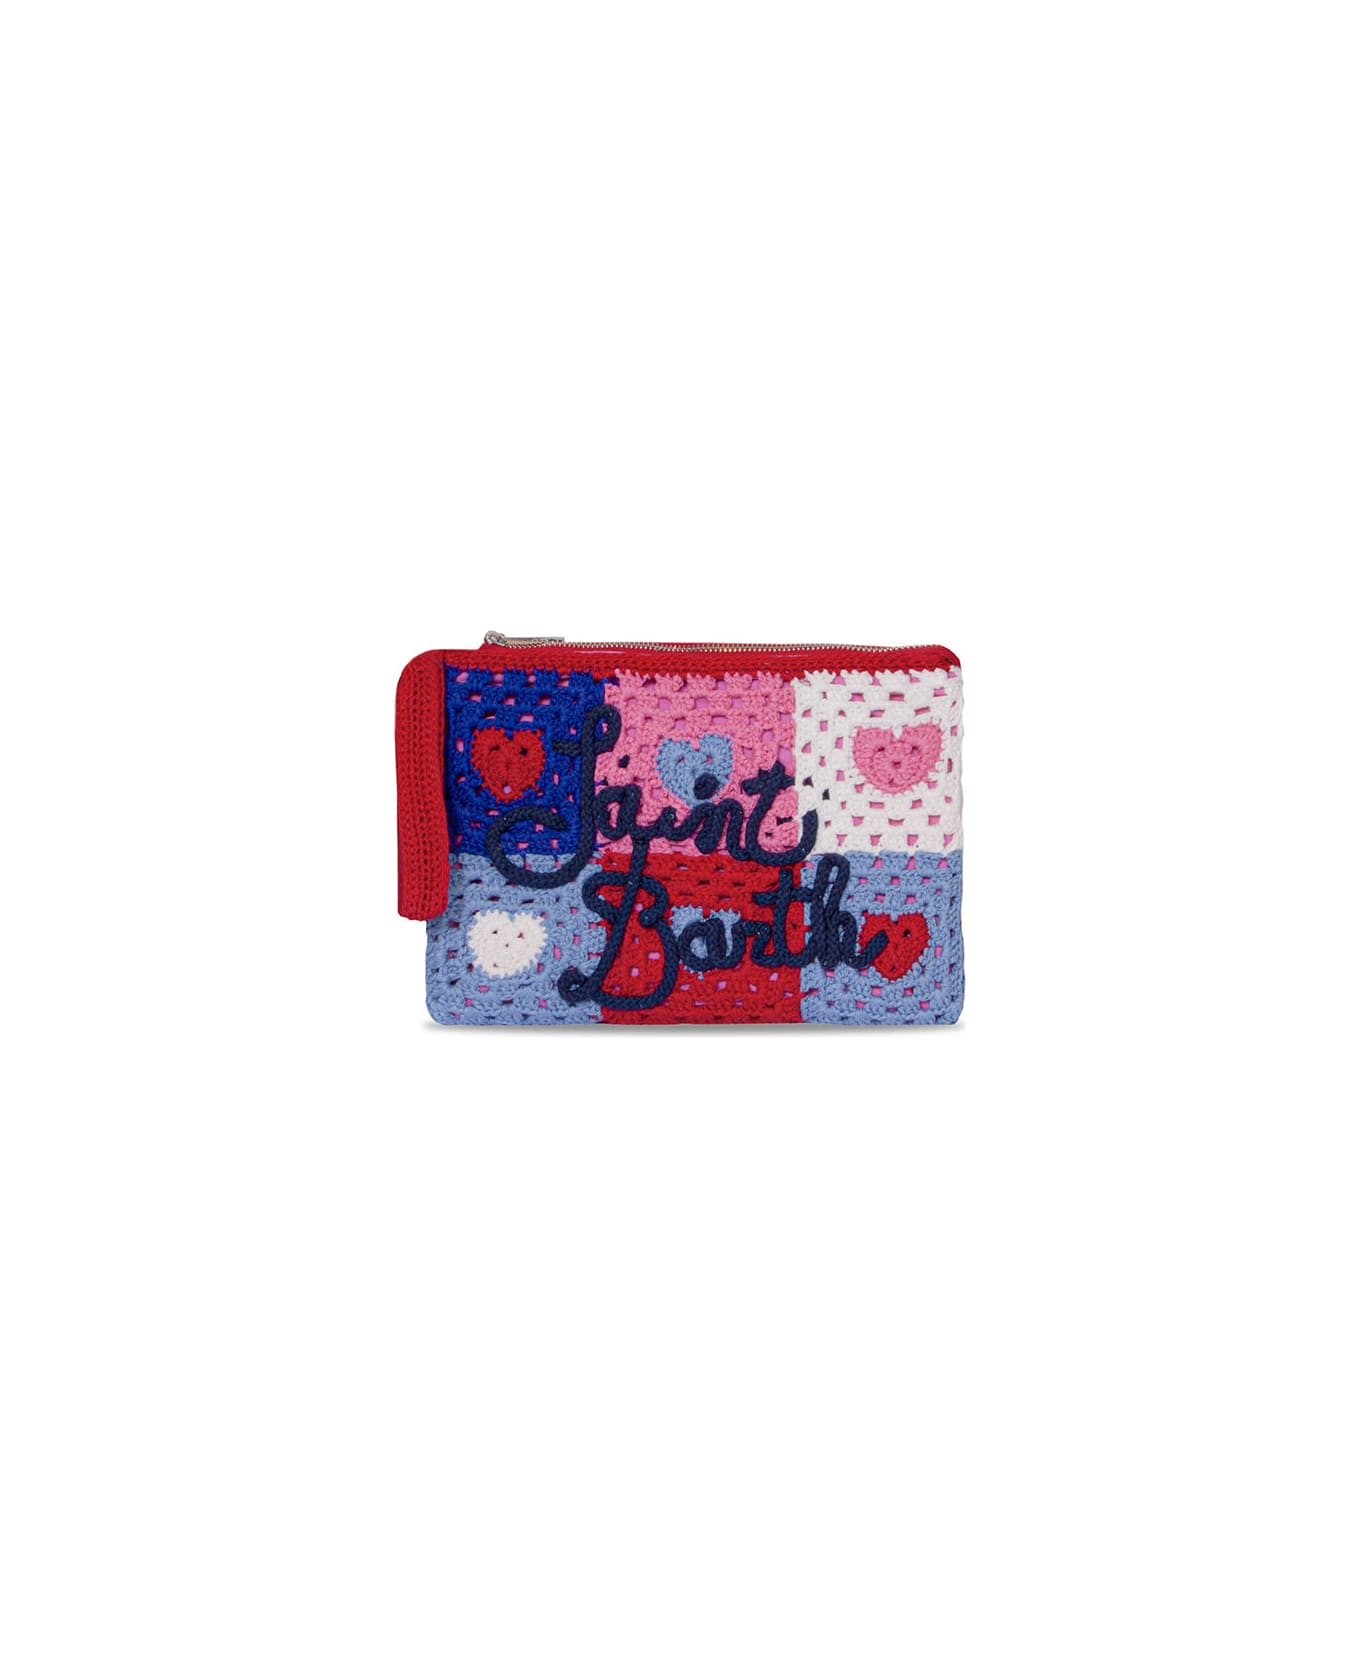 MC2 Saint Barth Parisienne Crochet Pouch Bag With Heart Embroidery - RED トラベルバッグ